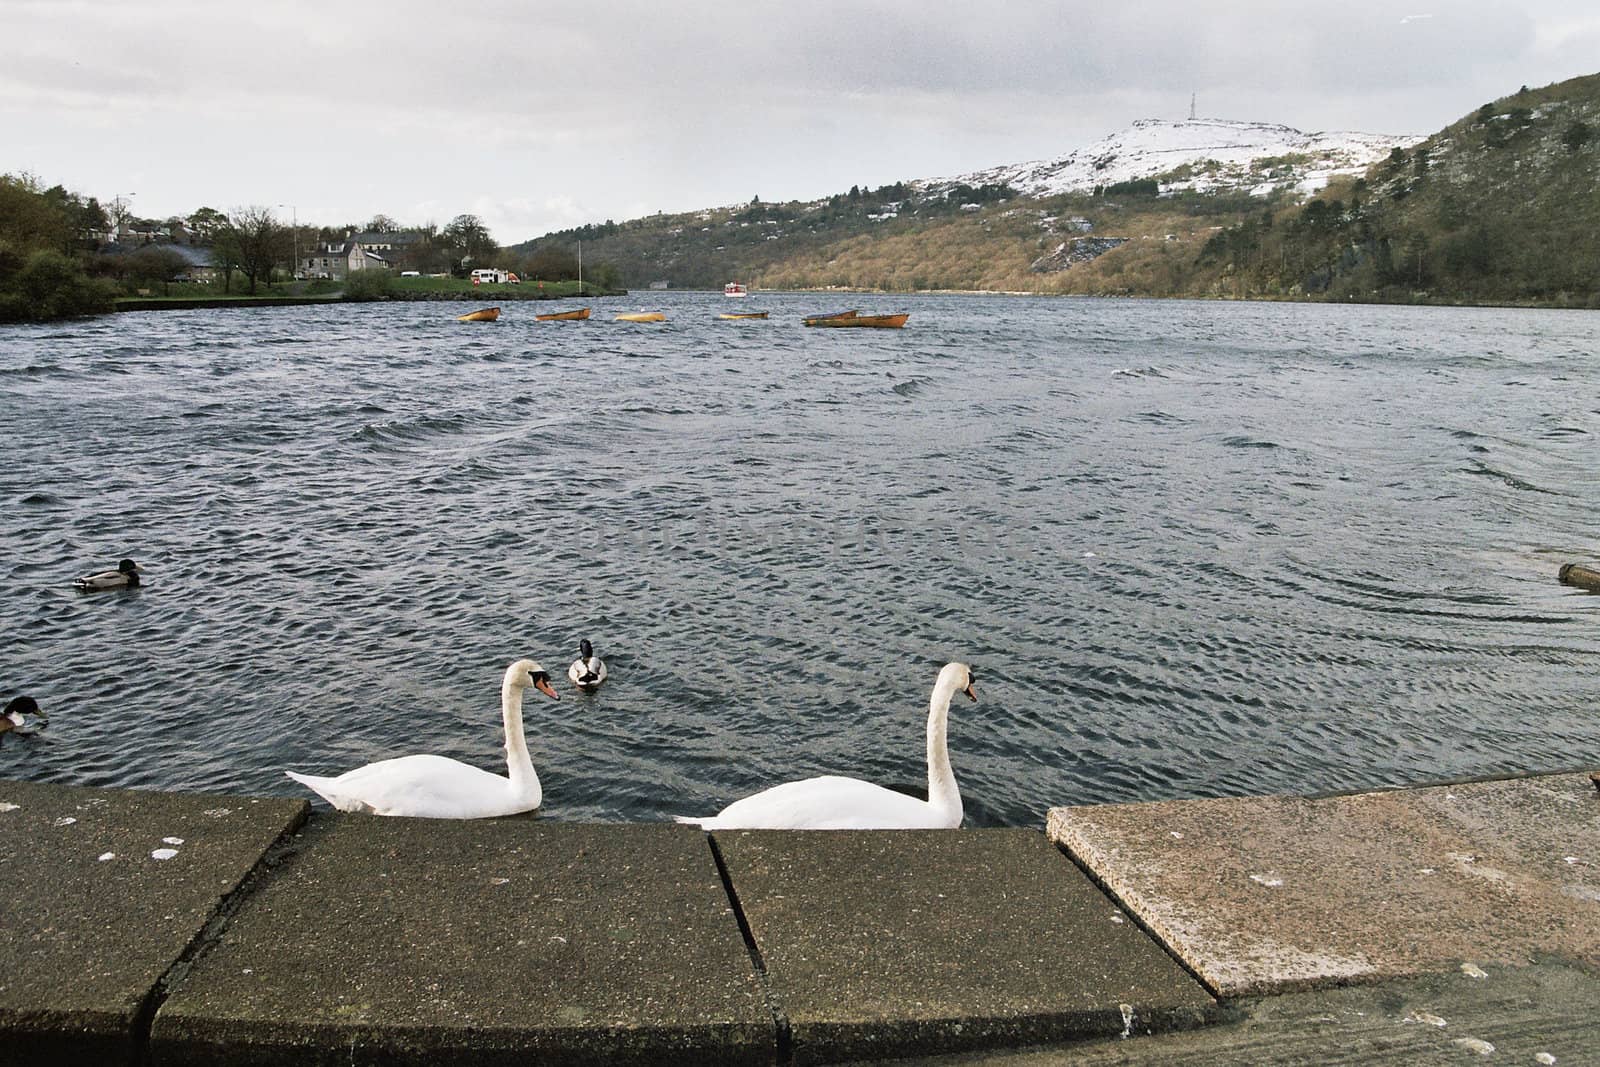 A pair of mute swans on a lake with ducks and boats and hills in the distance.